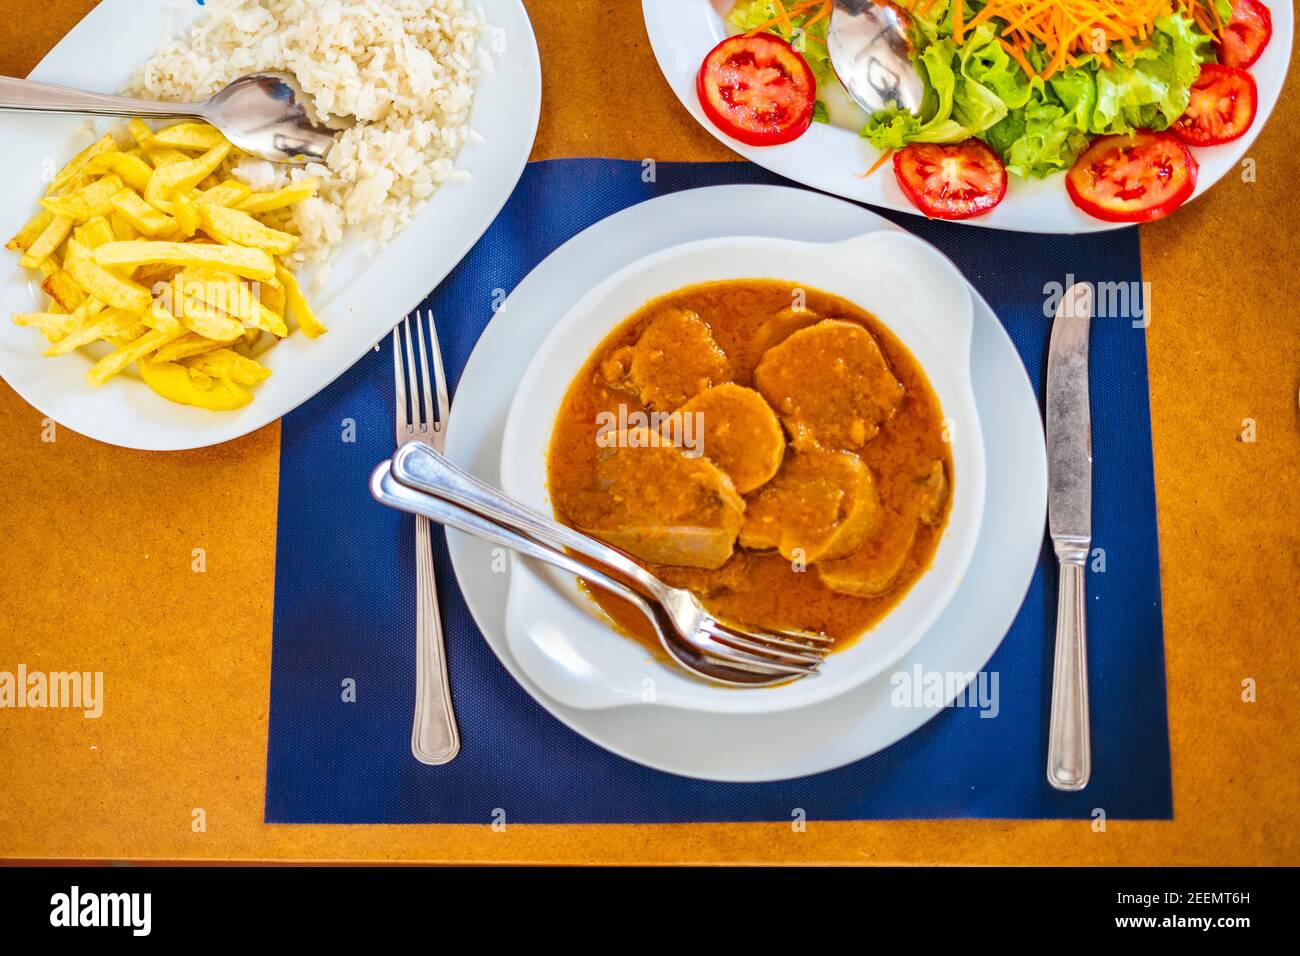 Traditional food from Alentejo - cow's tongue in a sauce served with salad, rice and french fries, Portugal, Europe Stock Photo